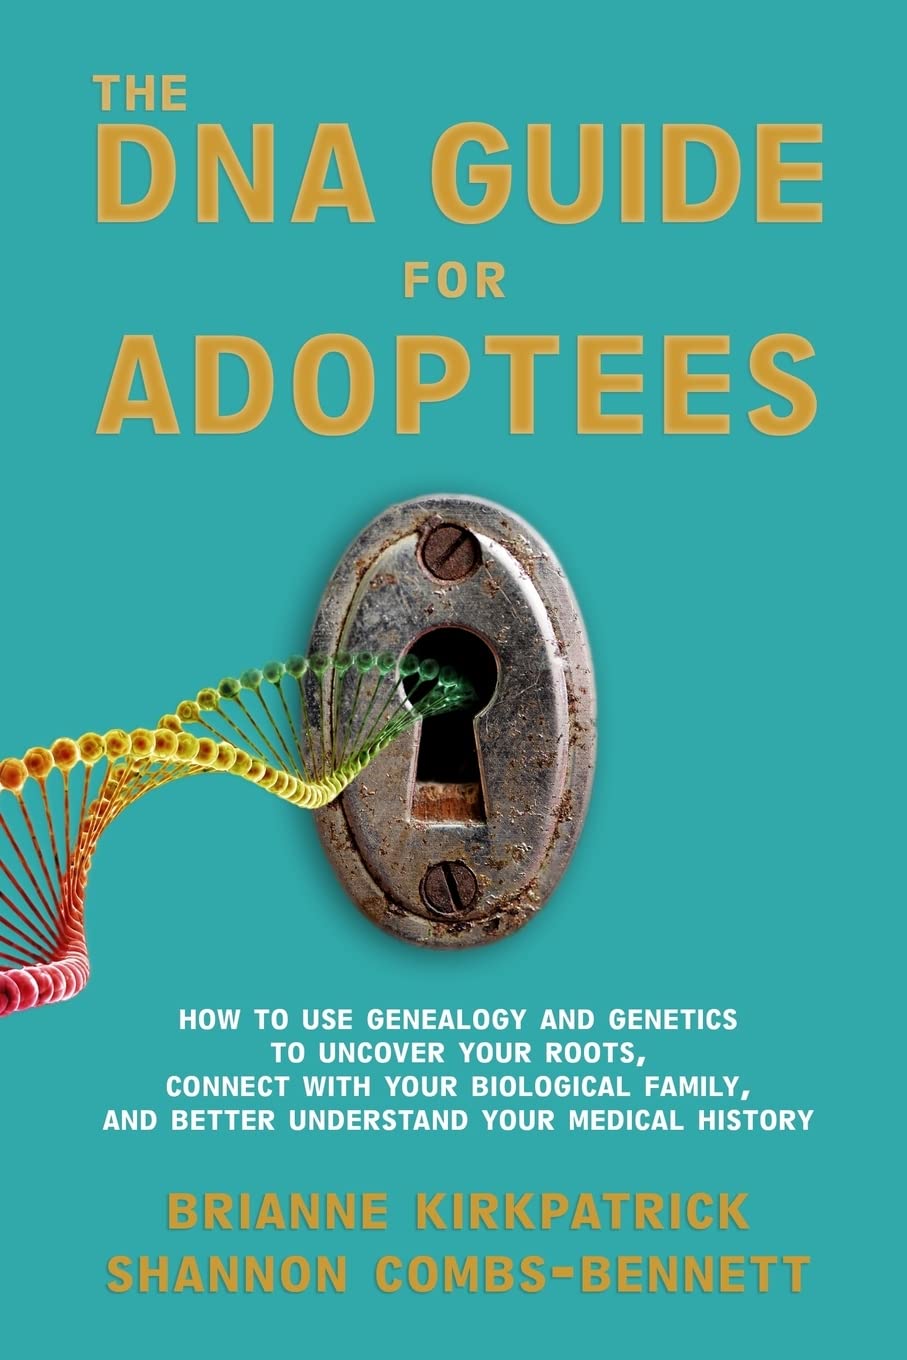 The DNA Guide for Adoptees: How to use genealogy and genetics to uncover your roots, connect with your biological family, and better understand your medical history.